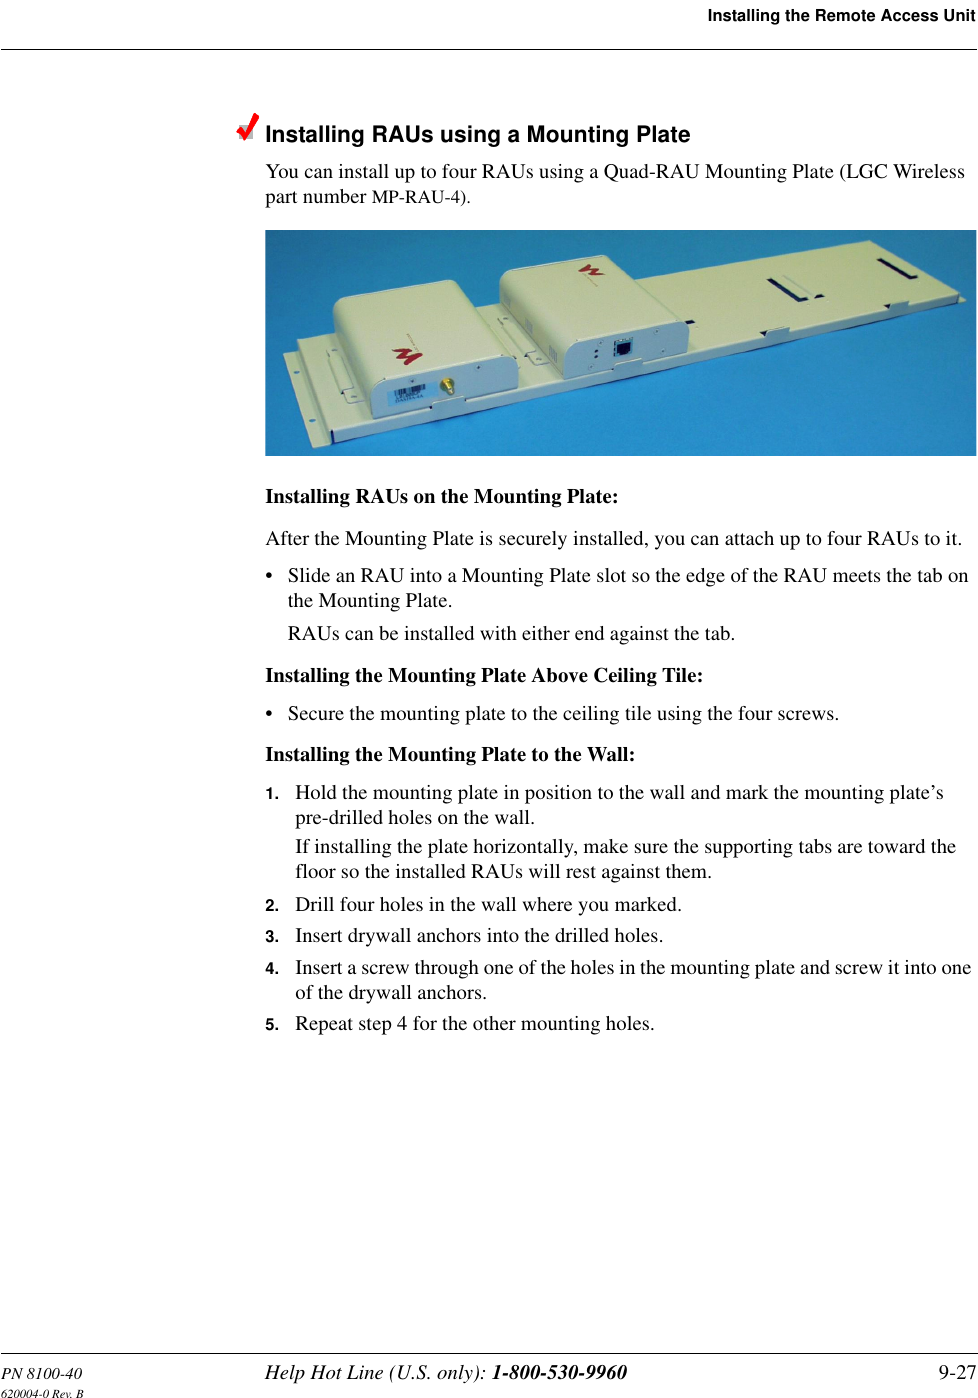 PN 8100-40 Help Hot Line (U.S. only): 1-800-530-9960 9-27620004-0 Rev. BInstalling the Remote Access UnitInstalling RAUs using a Mounting PlateYou can install up to four RAUs using a Quad-RAU Mounting Plate (LGC Wireless part number MP-RAU-4).Installing RAUs on the Mounting Plate:After the Mounting Plate is securely installed, you can attach up to four RAUs to it.• Slide an RAU into a Mounting Plate slot so the edge of the RAU meets the tab on the Mounting Plate.RAUs can be installed with either end against the tab.Installing the Mounting Plate Above Ceiling Tile:• Secure the mounting plate to the ceiling tile using the four screws.Installing the Mounting Plate to the Wall:1. Hold the mounting plate in position to the wall and mark the mounting plate’s pre-drilled holes on the wall.If installing the plate horizontally, make sure the supporting tabs are toward the floor so the installed RAUs will rest against them.2. Drill four holes in the wall where you marked.3. Insert drywall anchors into the drilled holes.4. Insert a screw through one of the holes in the mounting plate and screw it into one of the drywall anchors.5. Repeat step 4 for the other mounting holes.